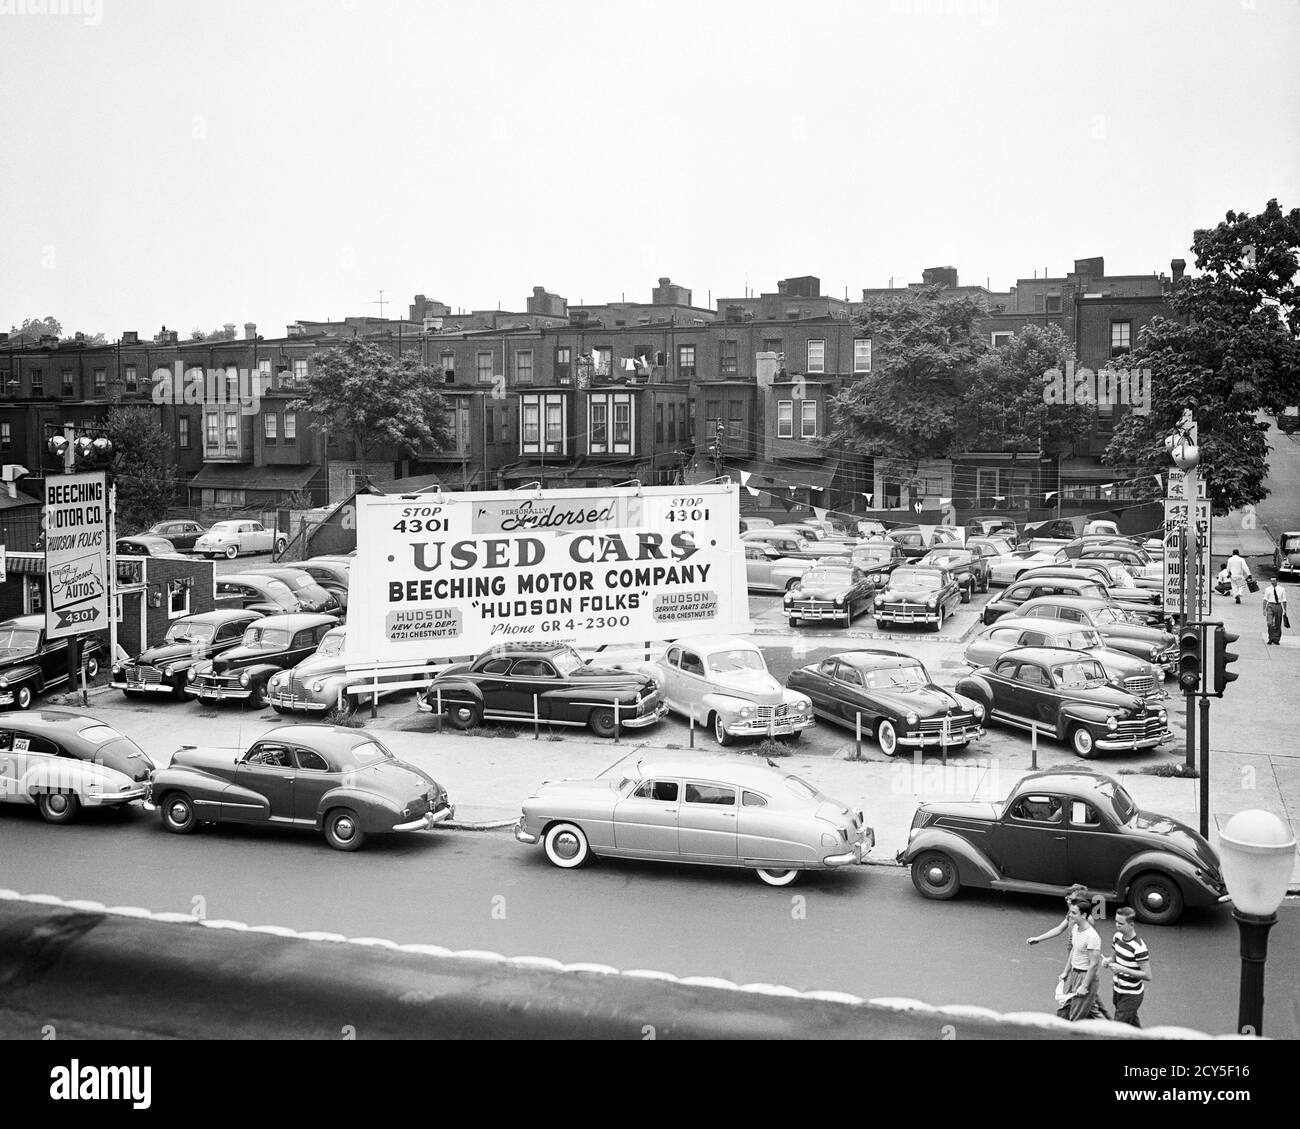 1940s 1950s USED CAR SALES LOT WITH LARGE SIGN AND SKYLINE OF ROW HOUSES PHILADELPHIA PENNSYLVANIA USA - m3264 HAR001 HARS OLD FASHIONED Stock Photo